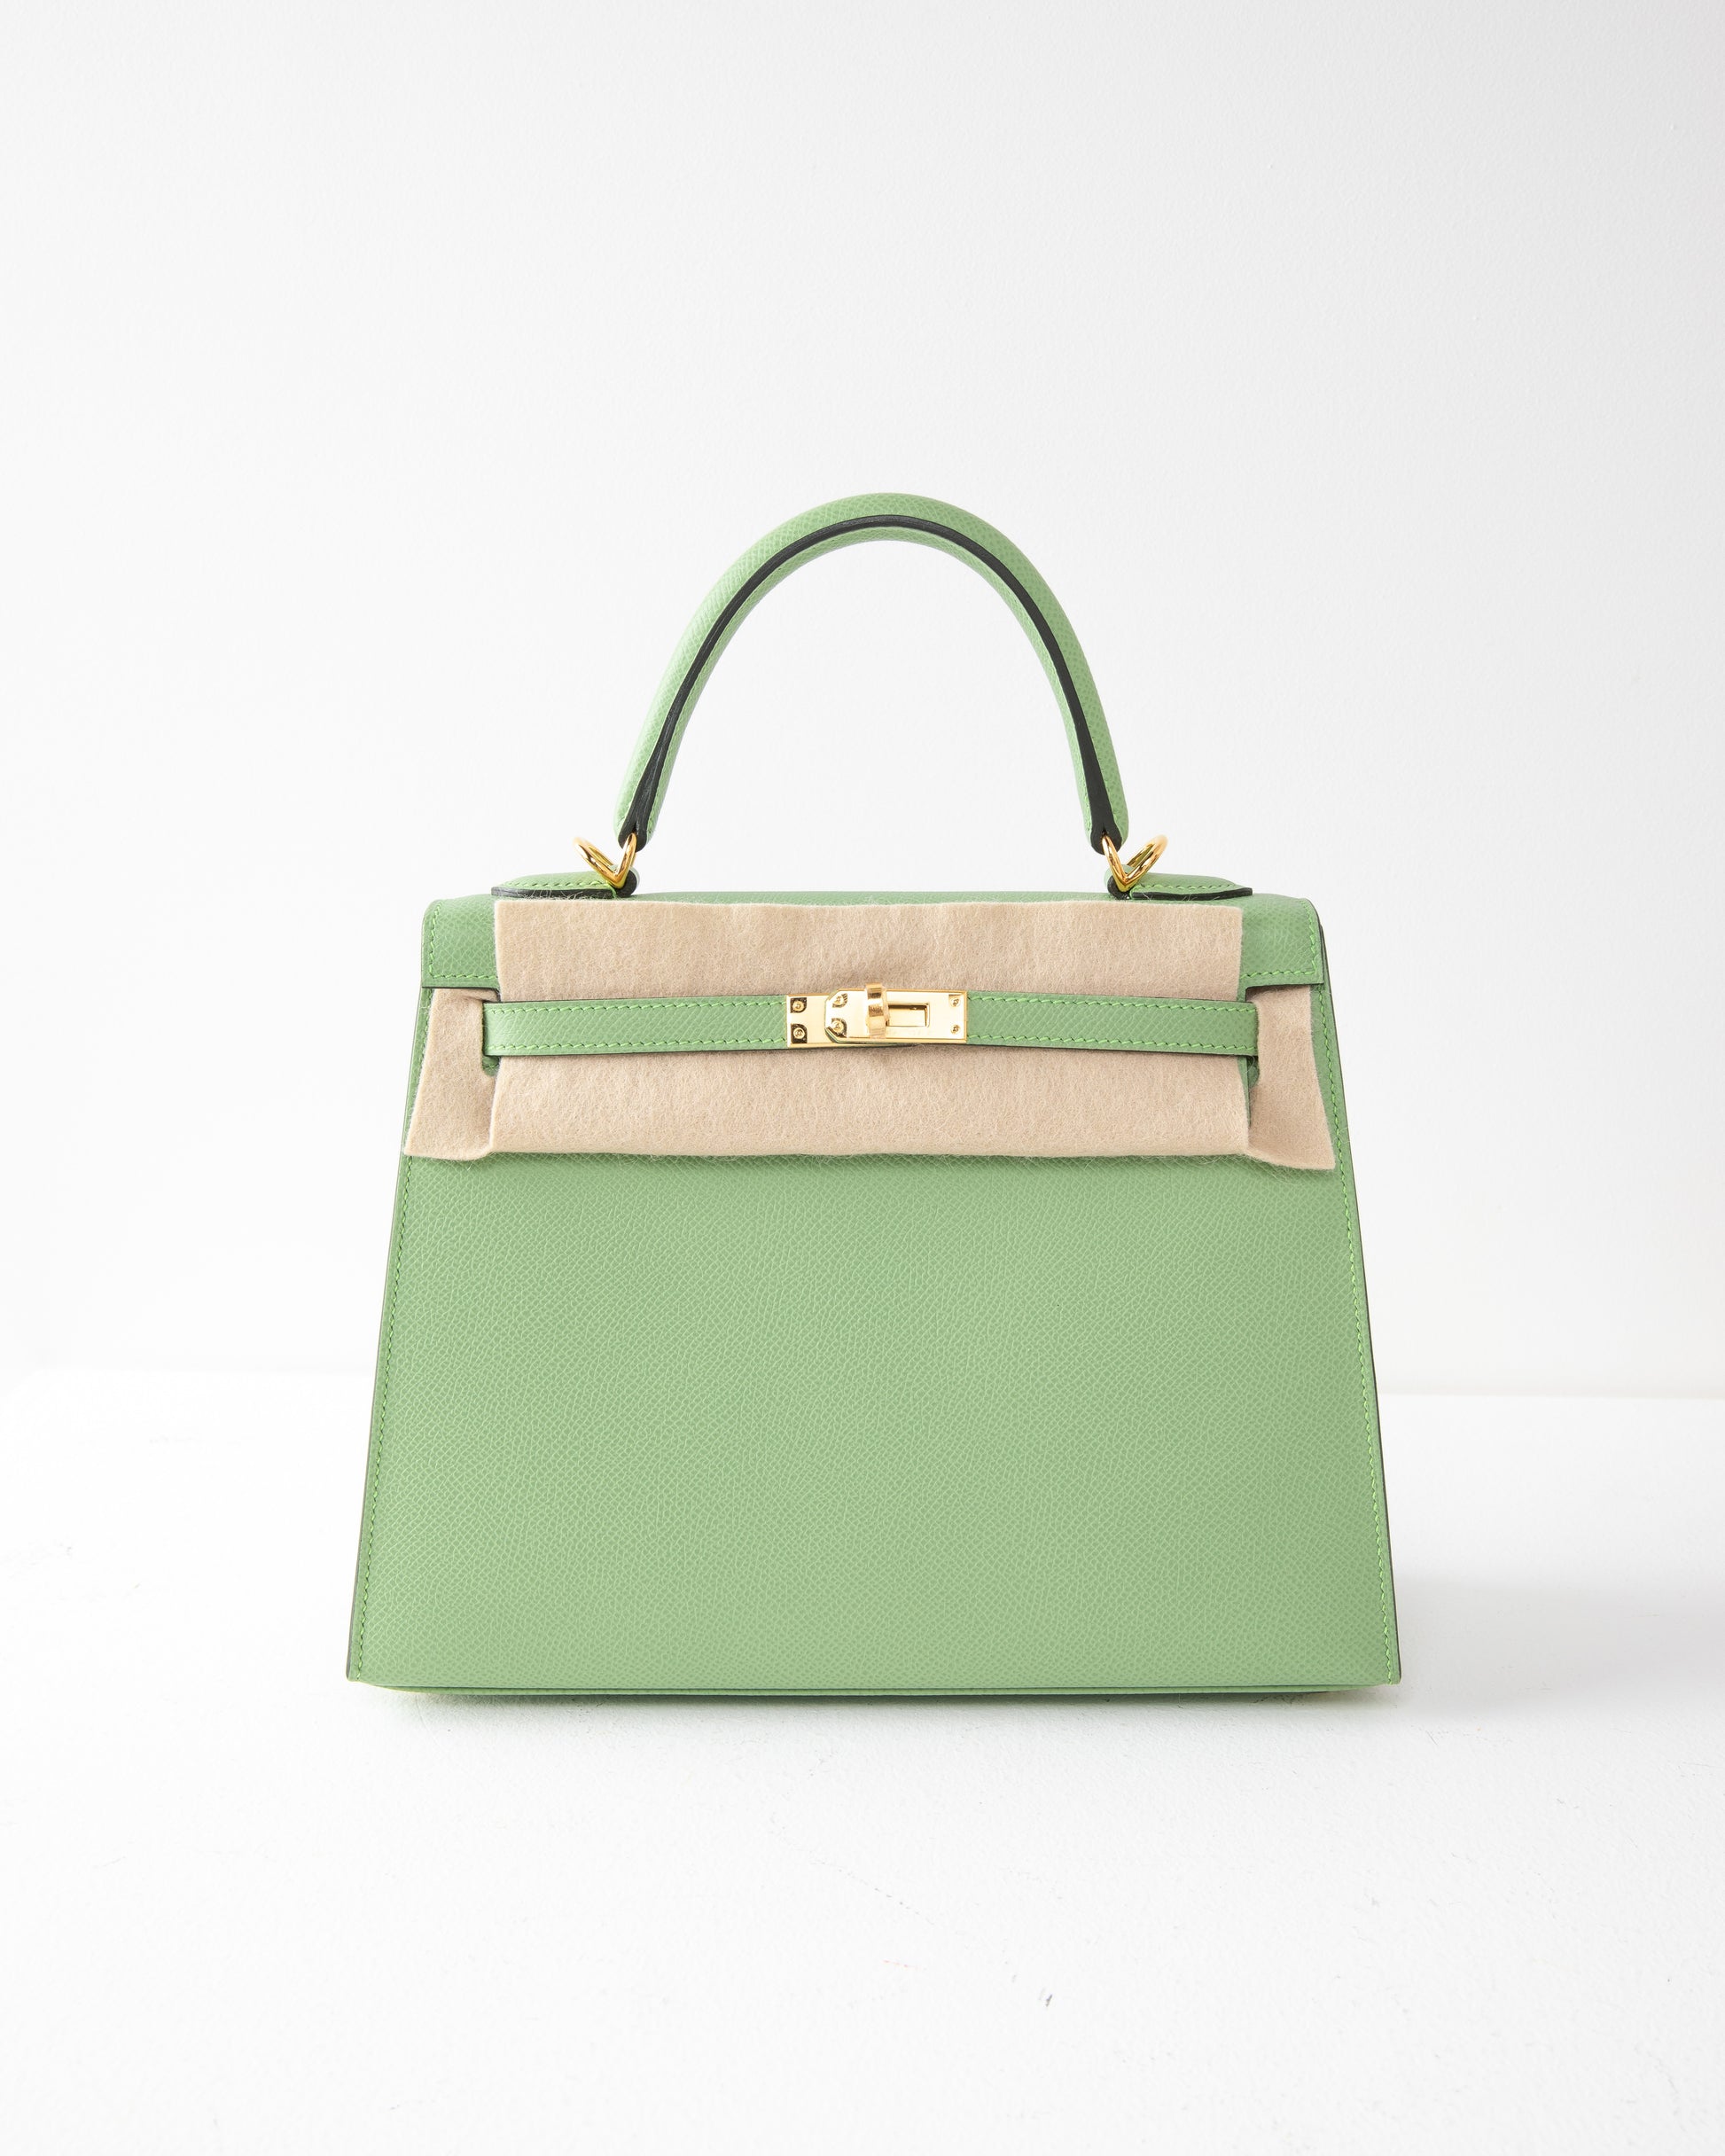 Hermes Kelly 25 Sellier Bag Vert Criquet Epsom Leather with Gold Hardware